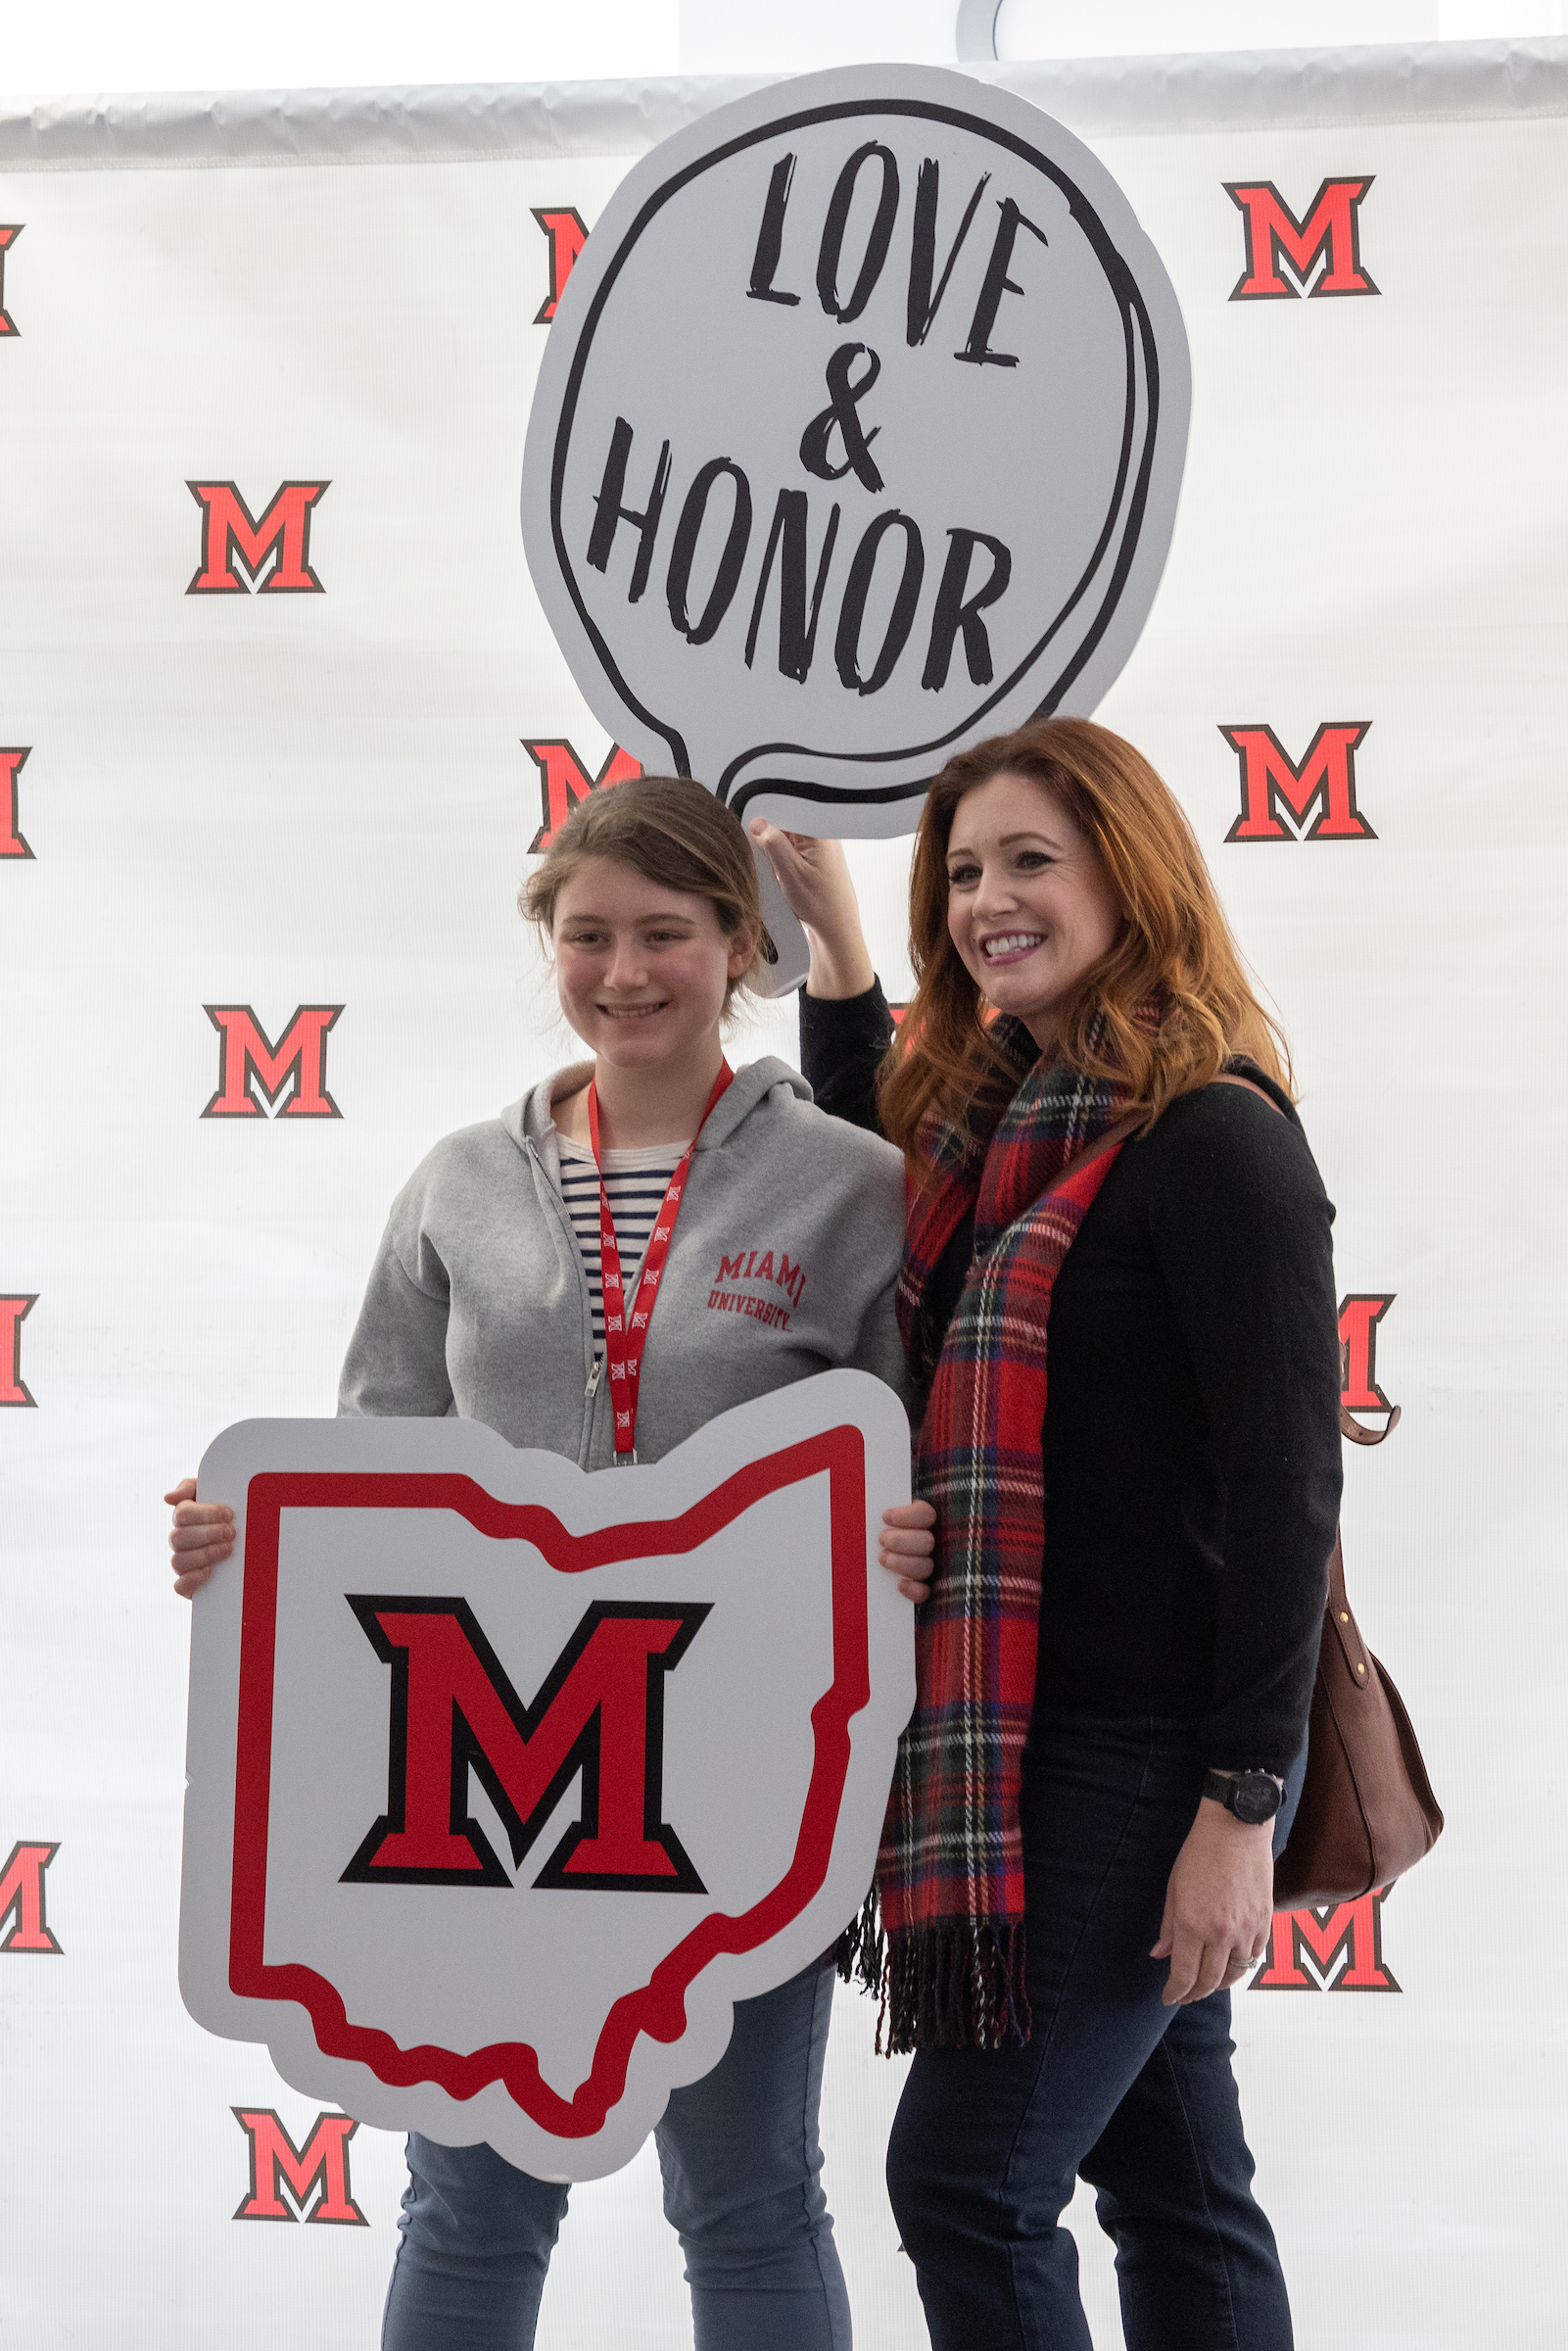 A student and parent pose in front of a Miami backdrop with "Love and Honor" and "Miami Ohio" signs.